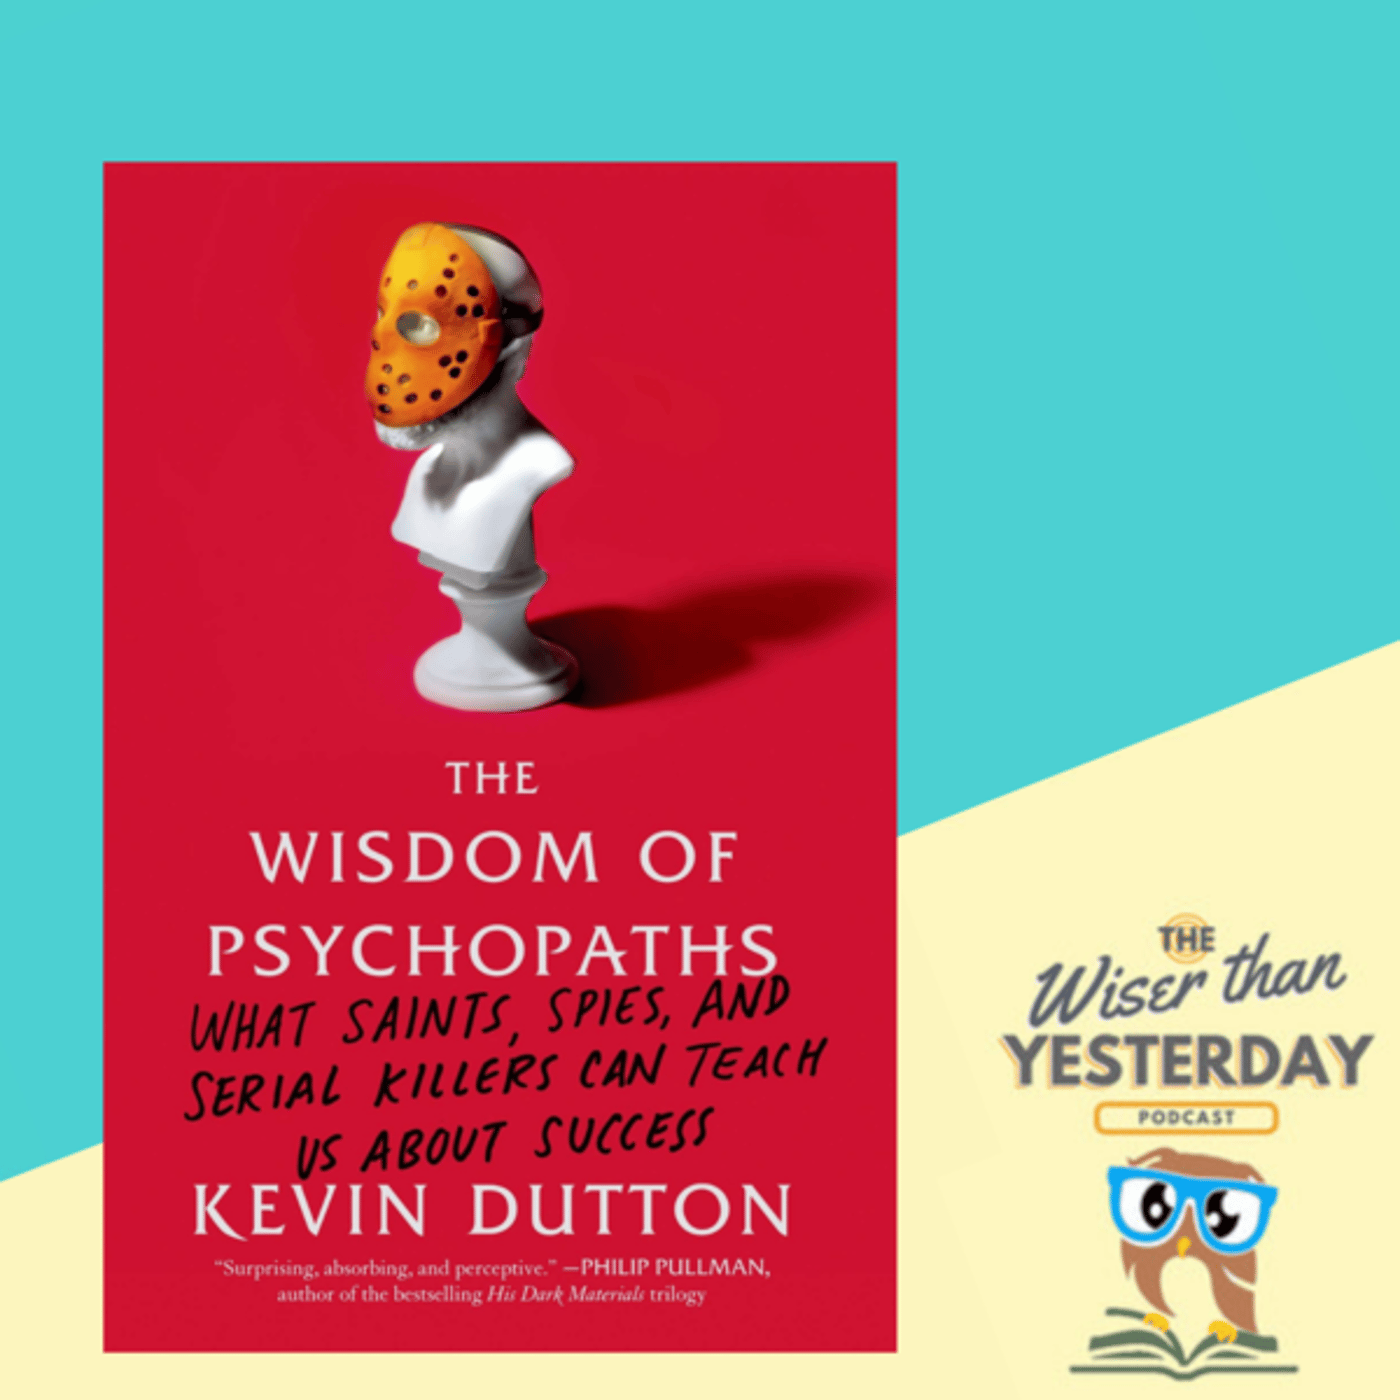 NEURODIVERSITY - PSYCHOPATHS: The Wisdom of Psychopaths: What Saints, Spies, and Serial Killers Can Teach Us About Success by Kevin Dutton